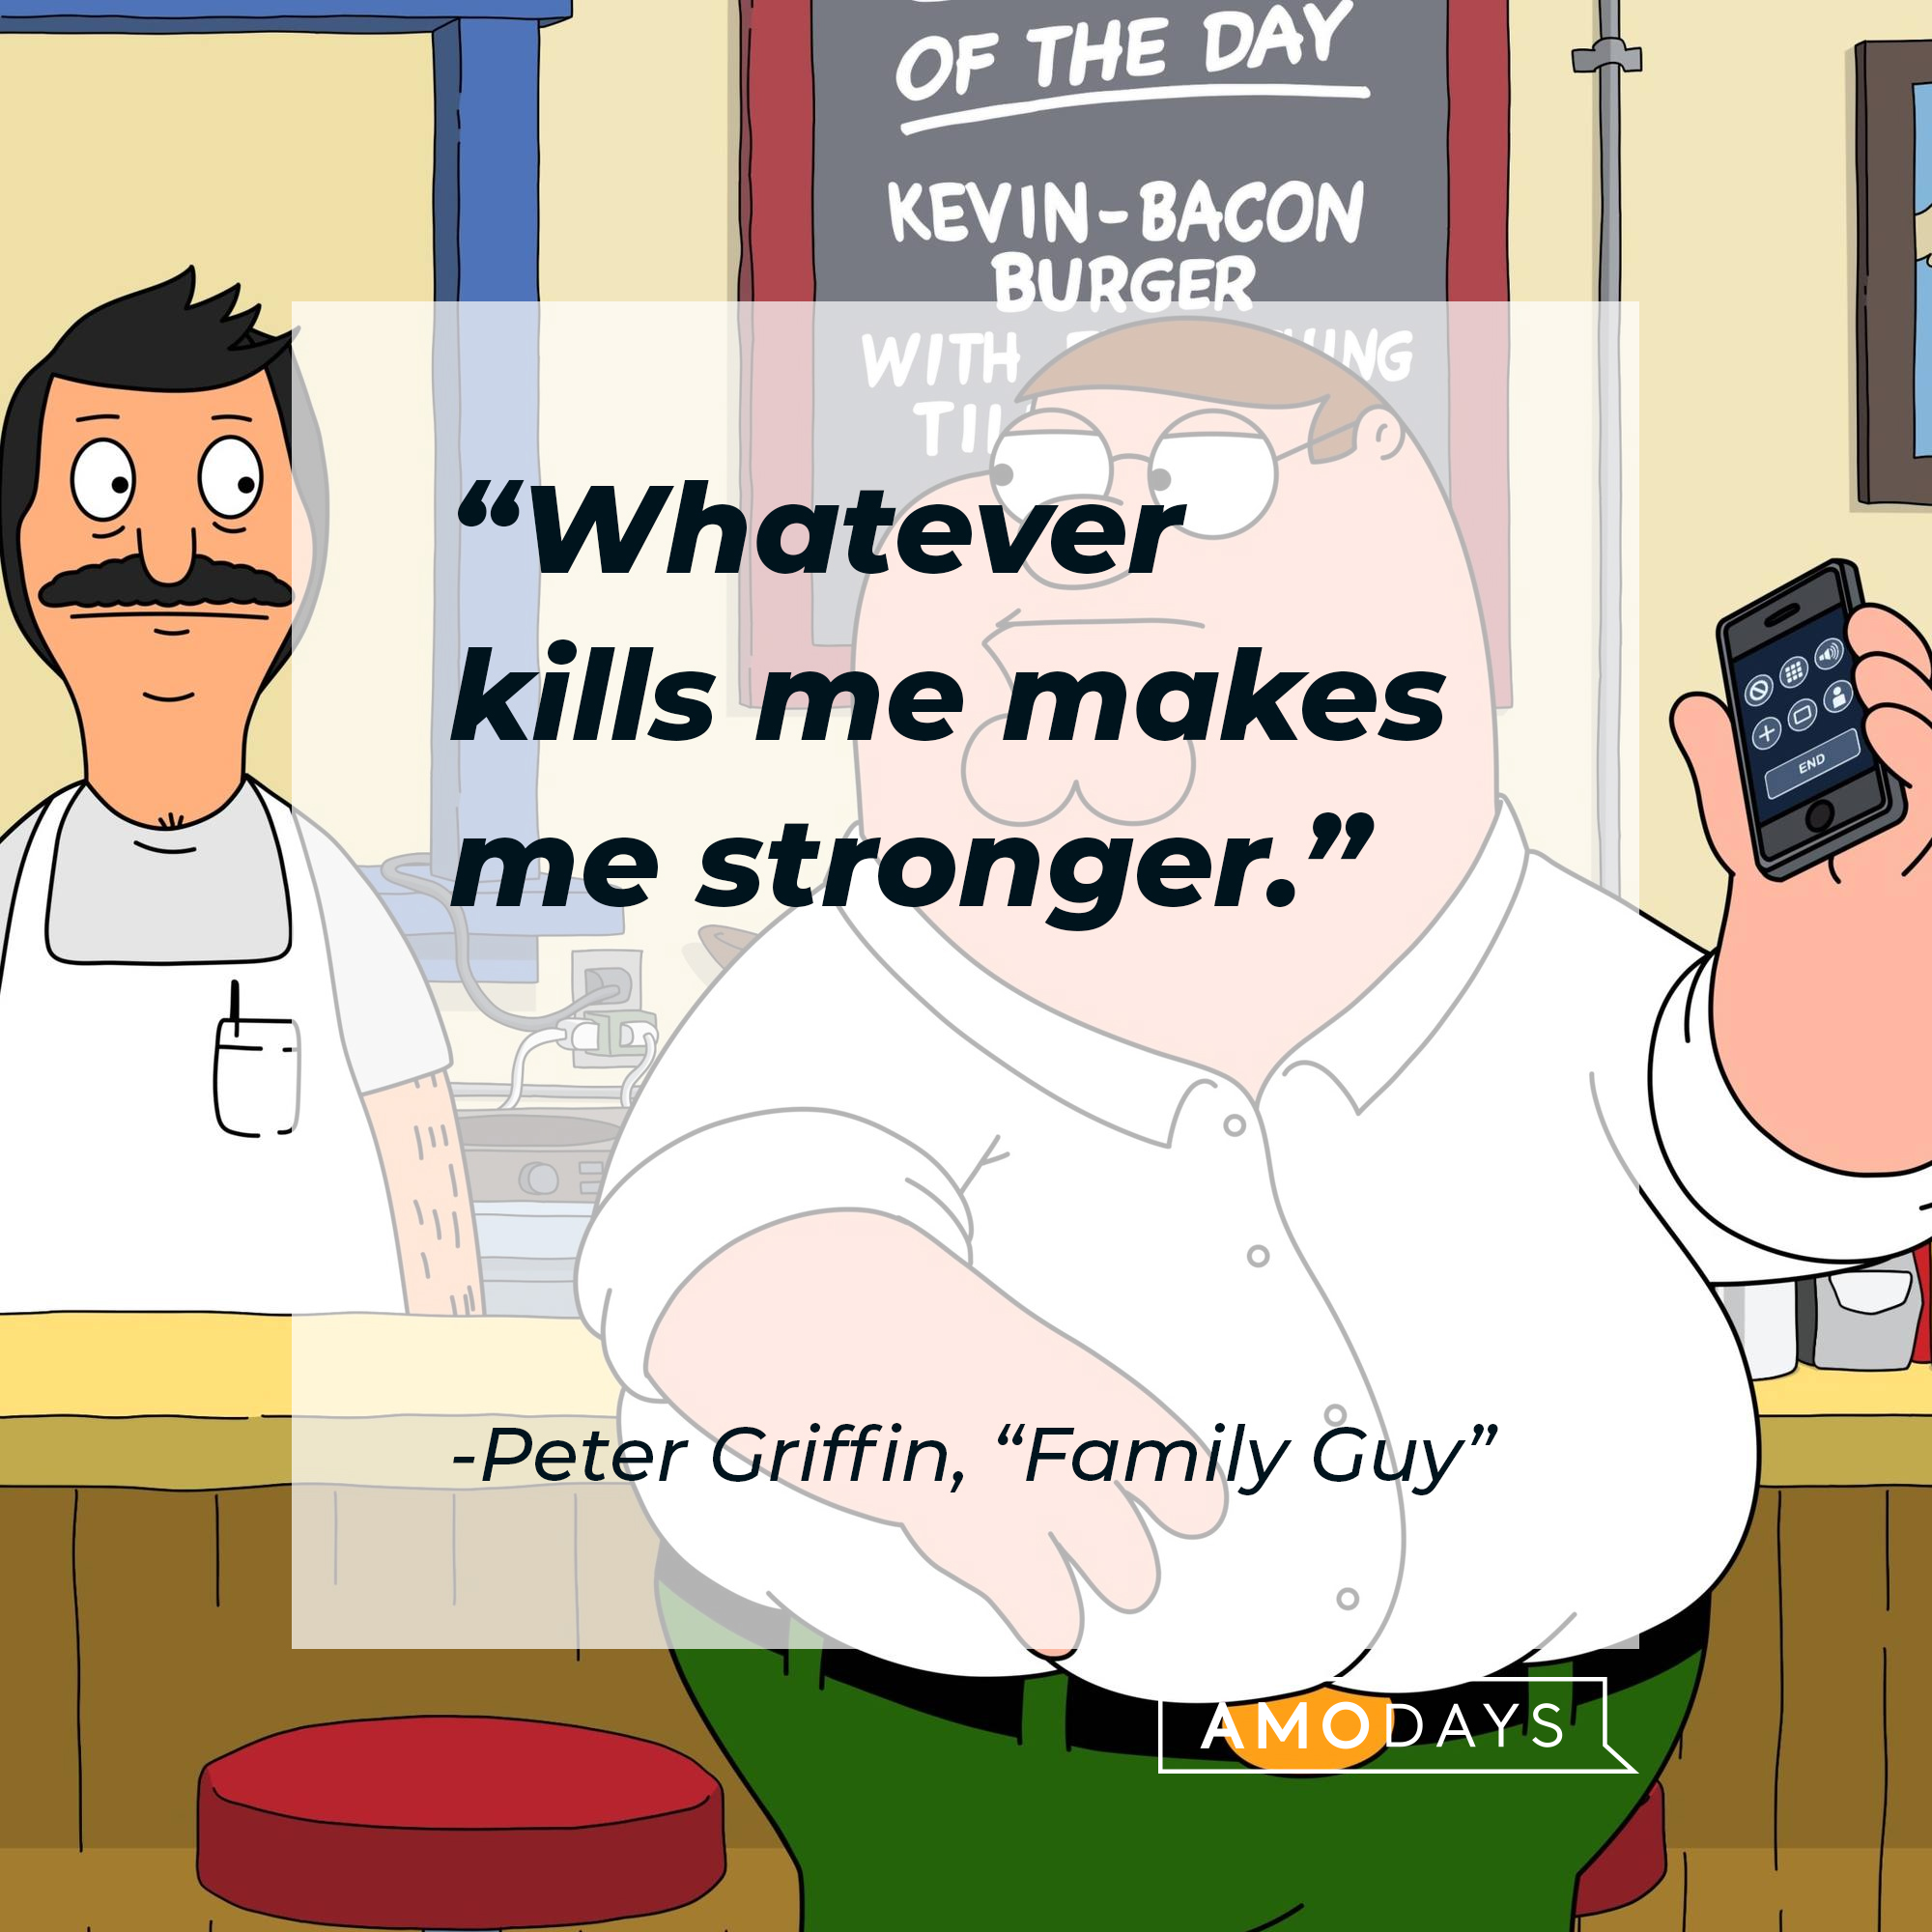 Peter Griffin's quote: "Whatever kills me makes me stronger." | Source: facebook.com/FamilyGuy